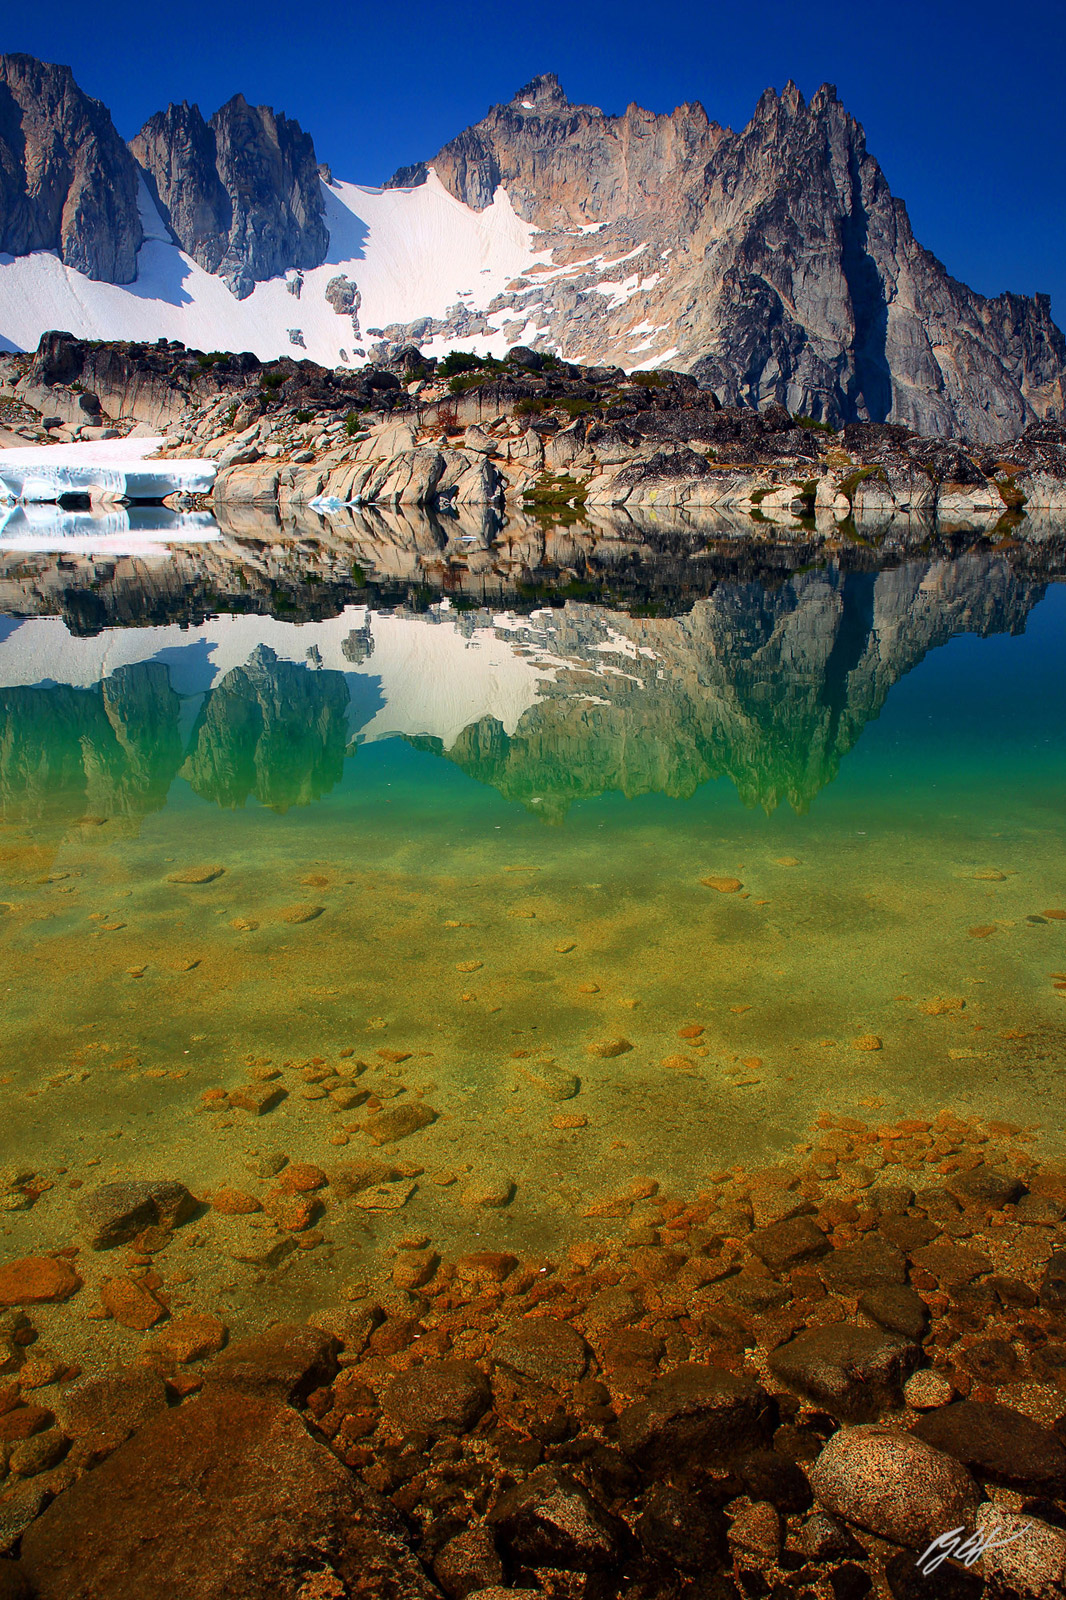 Dragontail Peak Reflected in Tranquil Lake, The Enchantments, alpine Lakes Wilderness, Washington